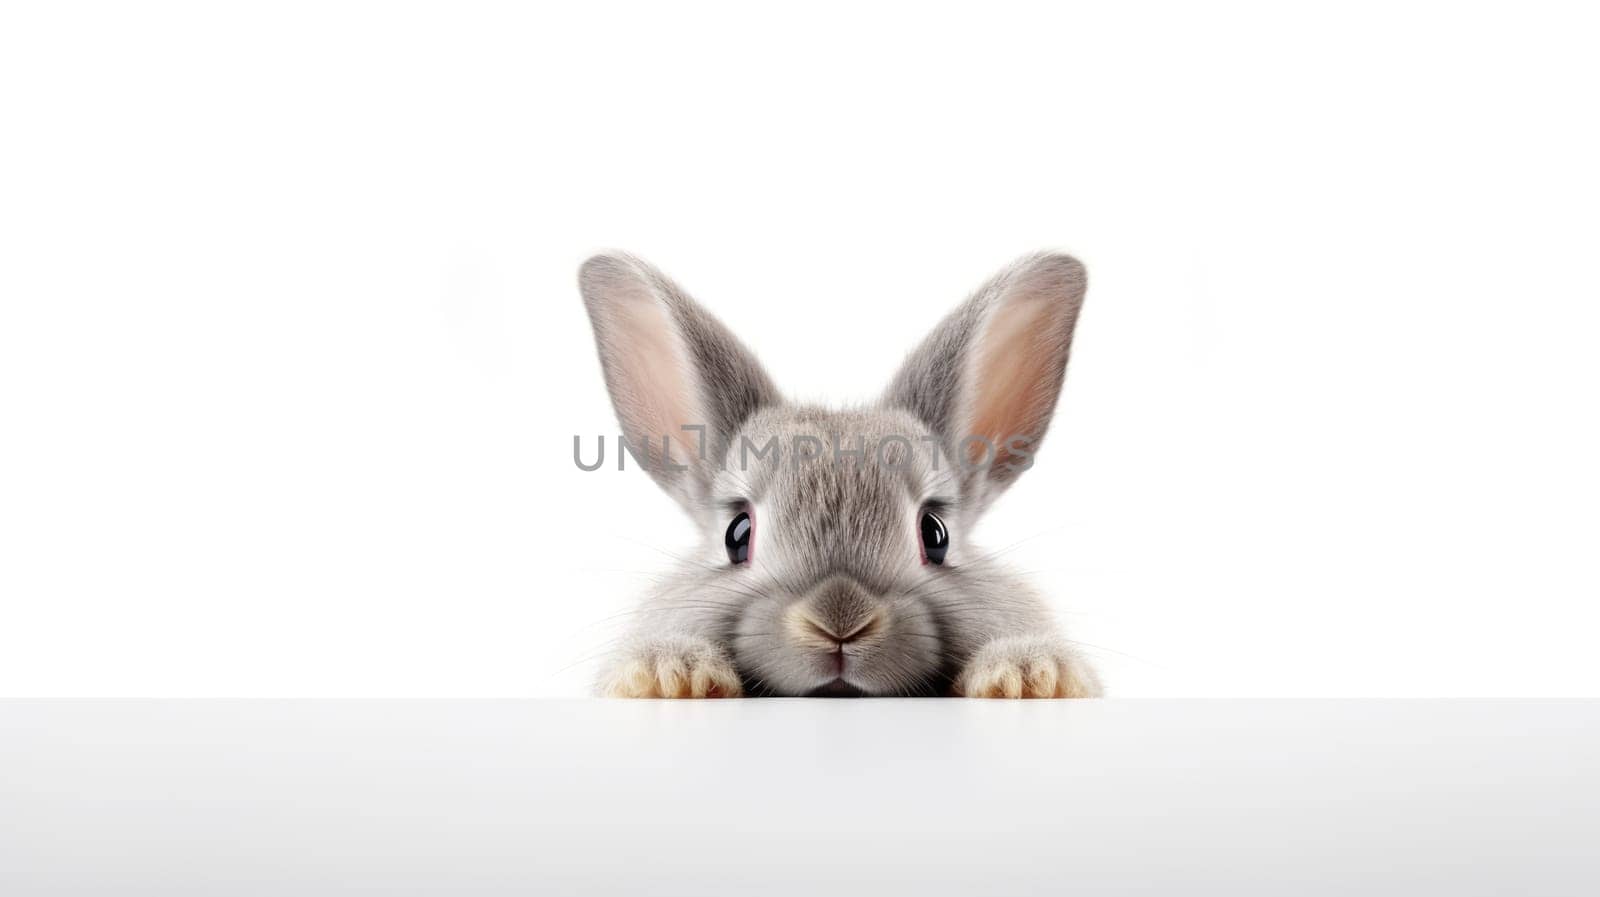 Surprised Funny Cute Bunny with Big Eyes hiding behind white banner on Light Background, Cute Animal Portrait.